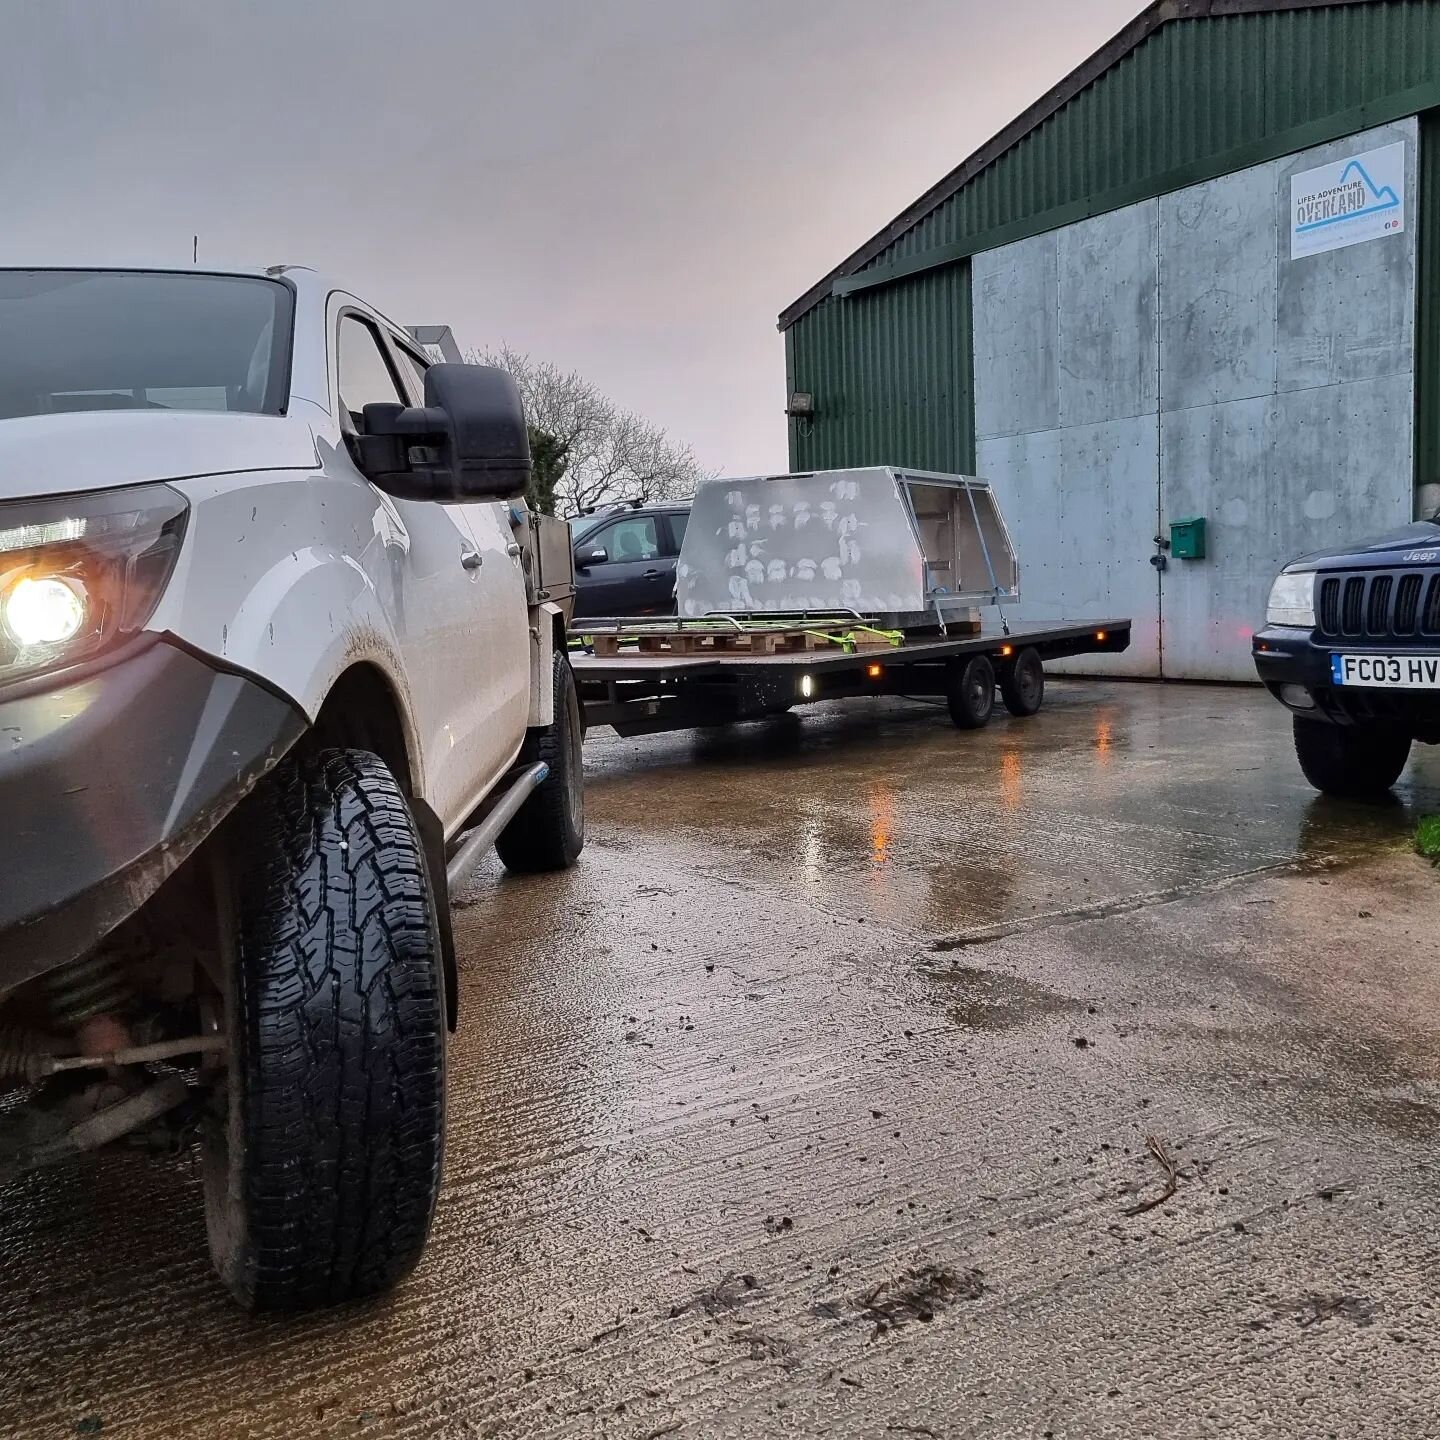 The next #LAO gen2 chassis mount canopy is out of the shed and off to be powder coated! 
Really looking forward to seeing it back in colour!

#nissan&nbsp;#navara&nbsp;#nissannavara&nbsp;#np300&nbsp;#d40&nbsp;#custom&nbsp;#lao&nbsp;#doublecab&nbsp;#p